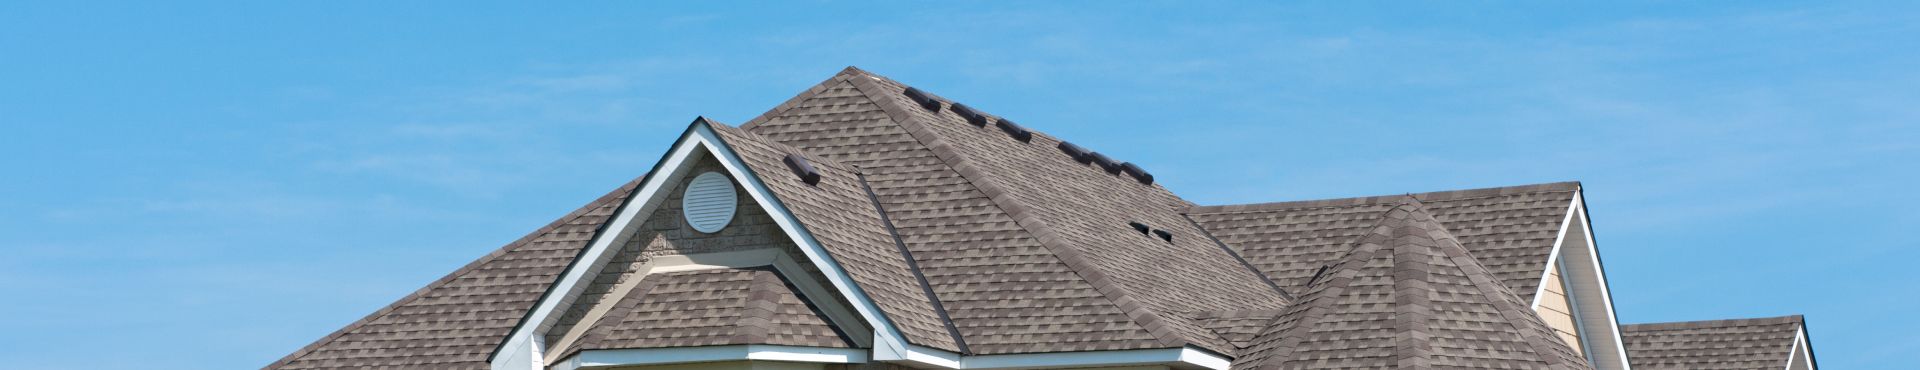 Residential Roofing Company